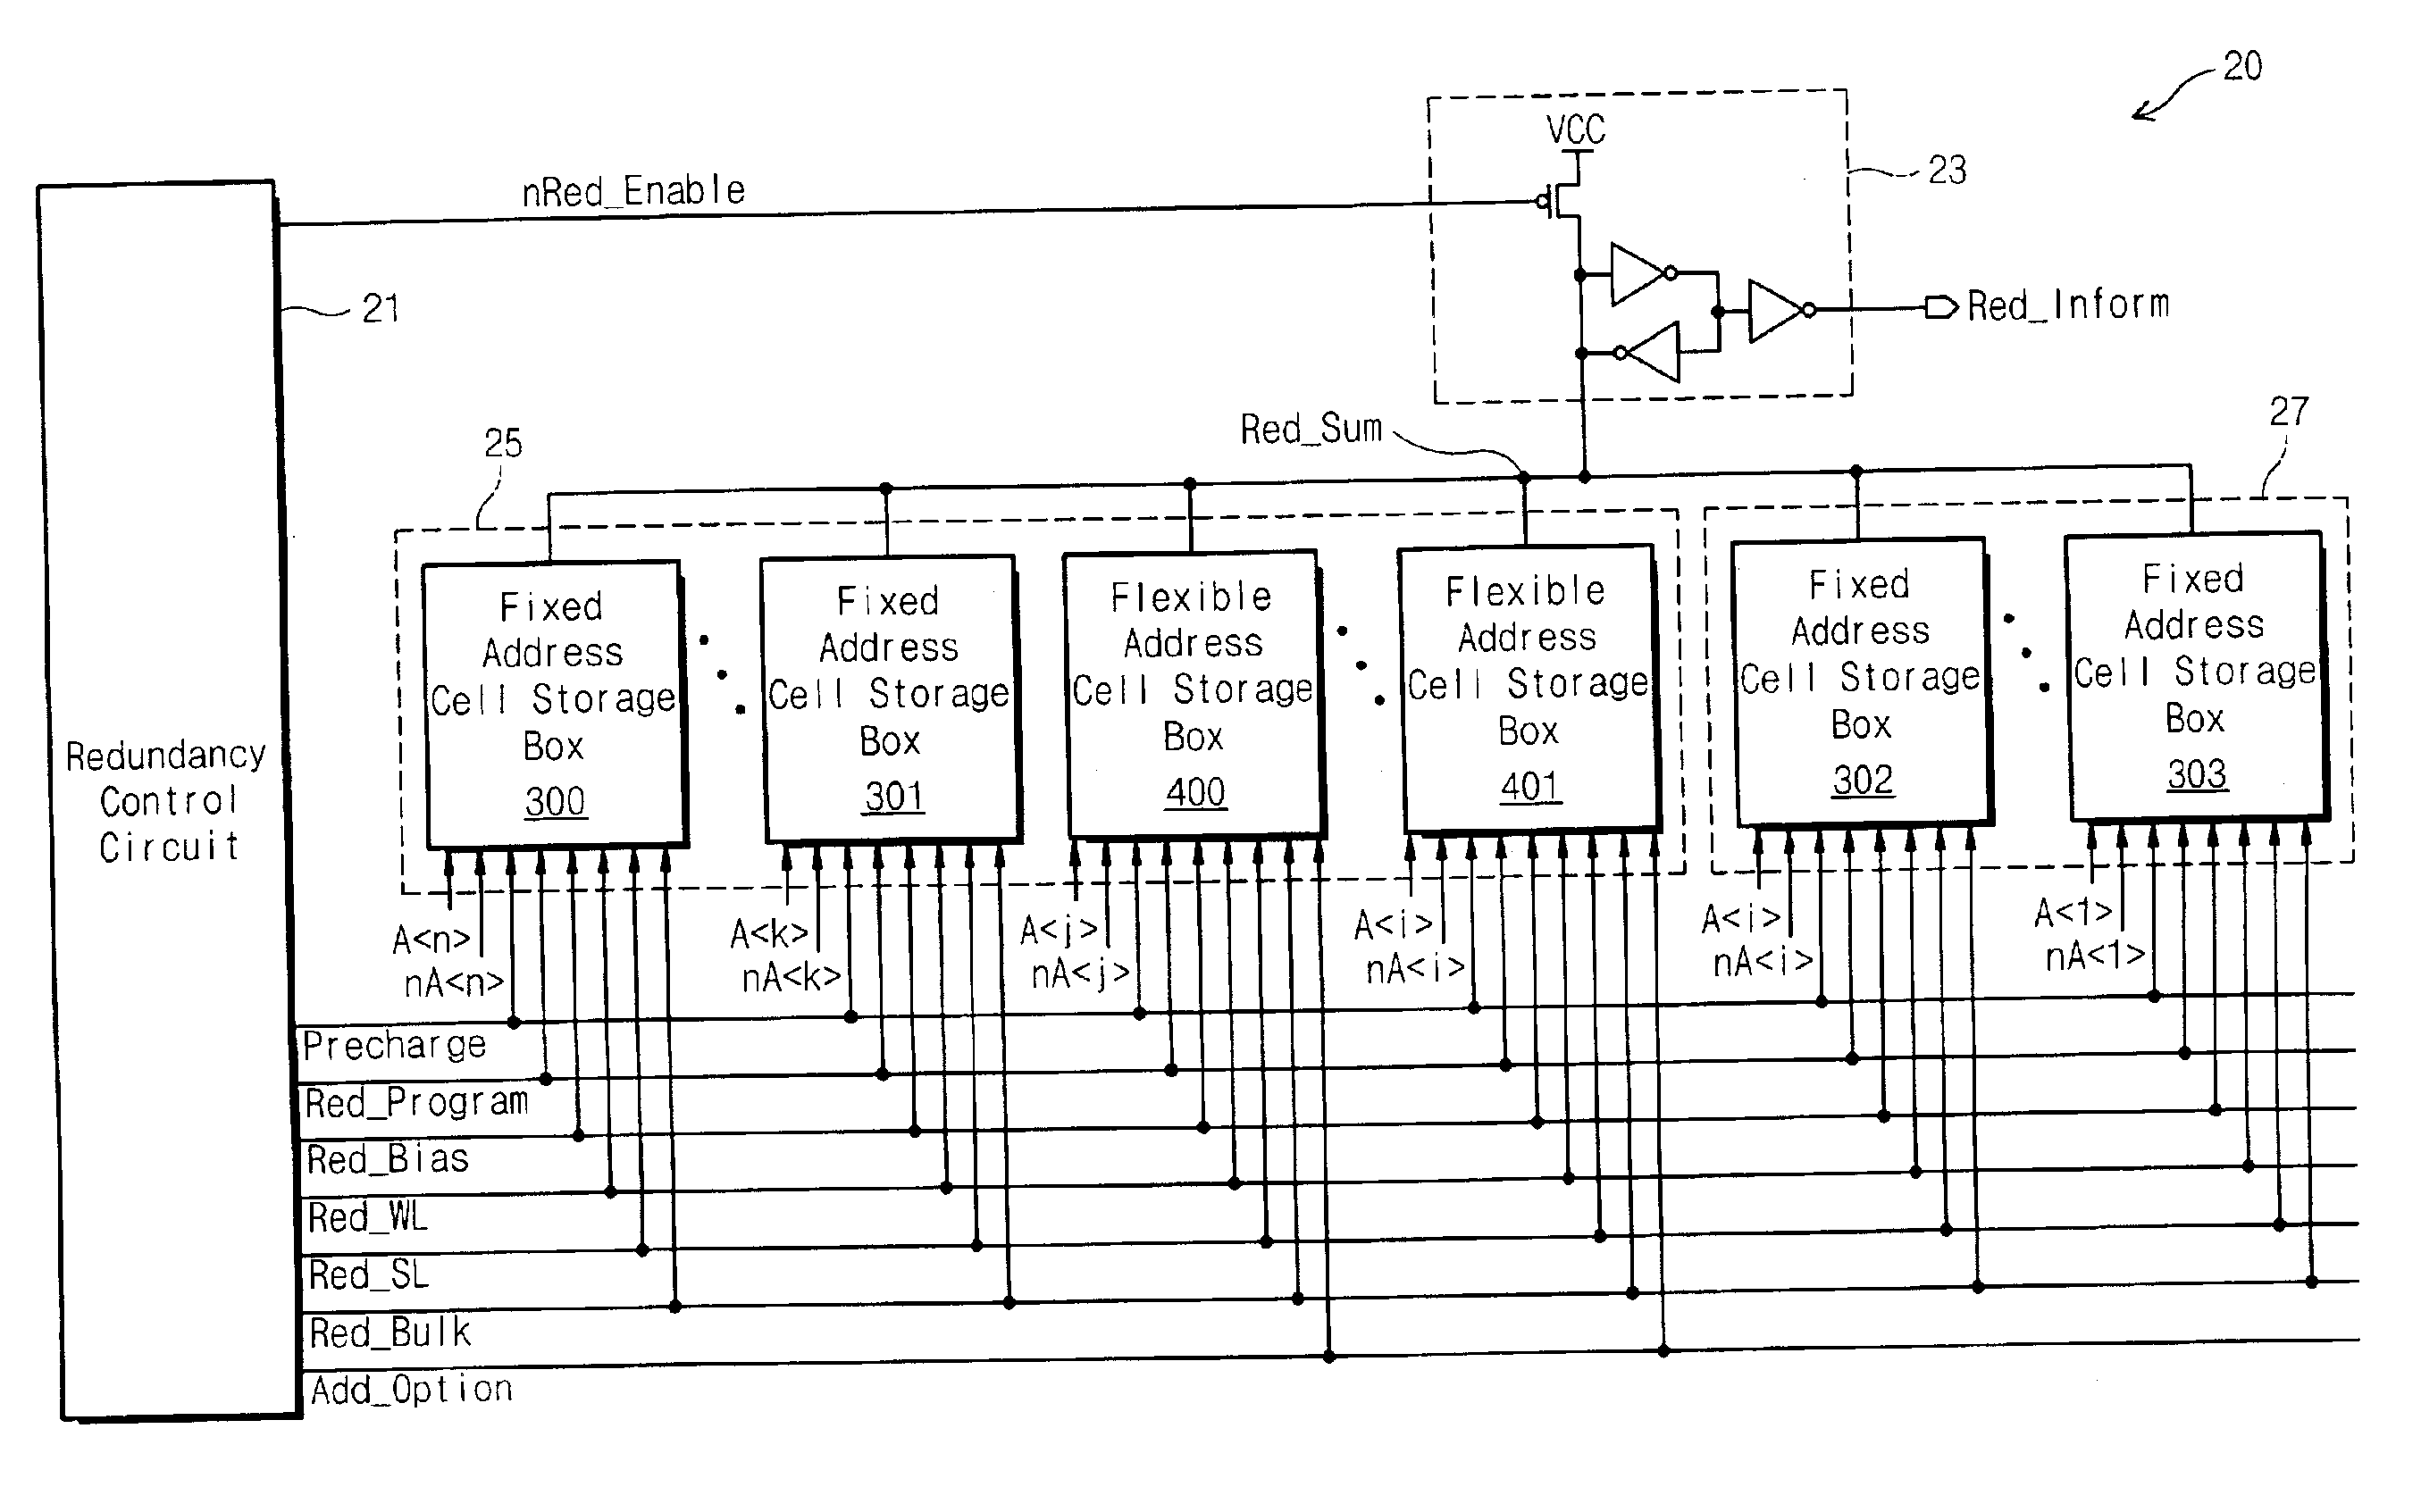 Semiconductor memory device with reduced chip area and improved redundancy efficency